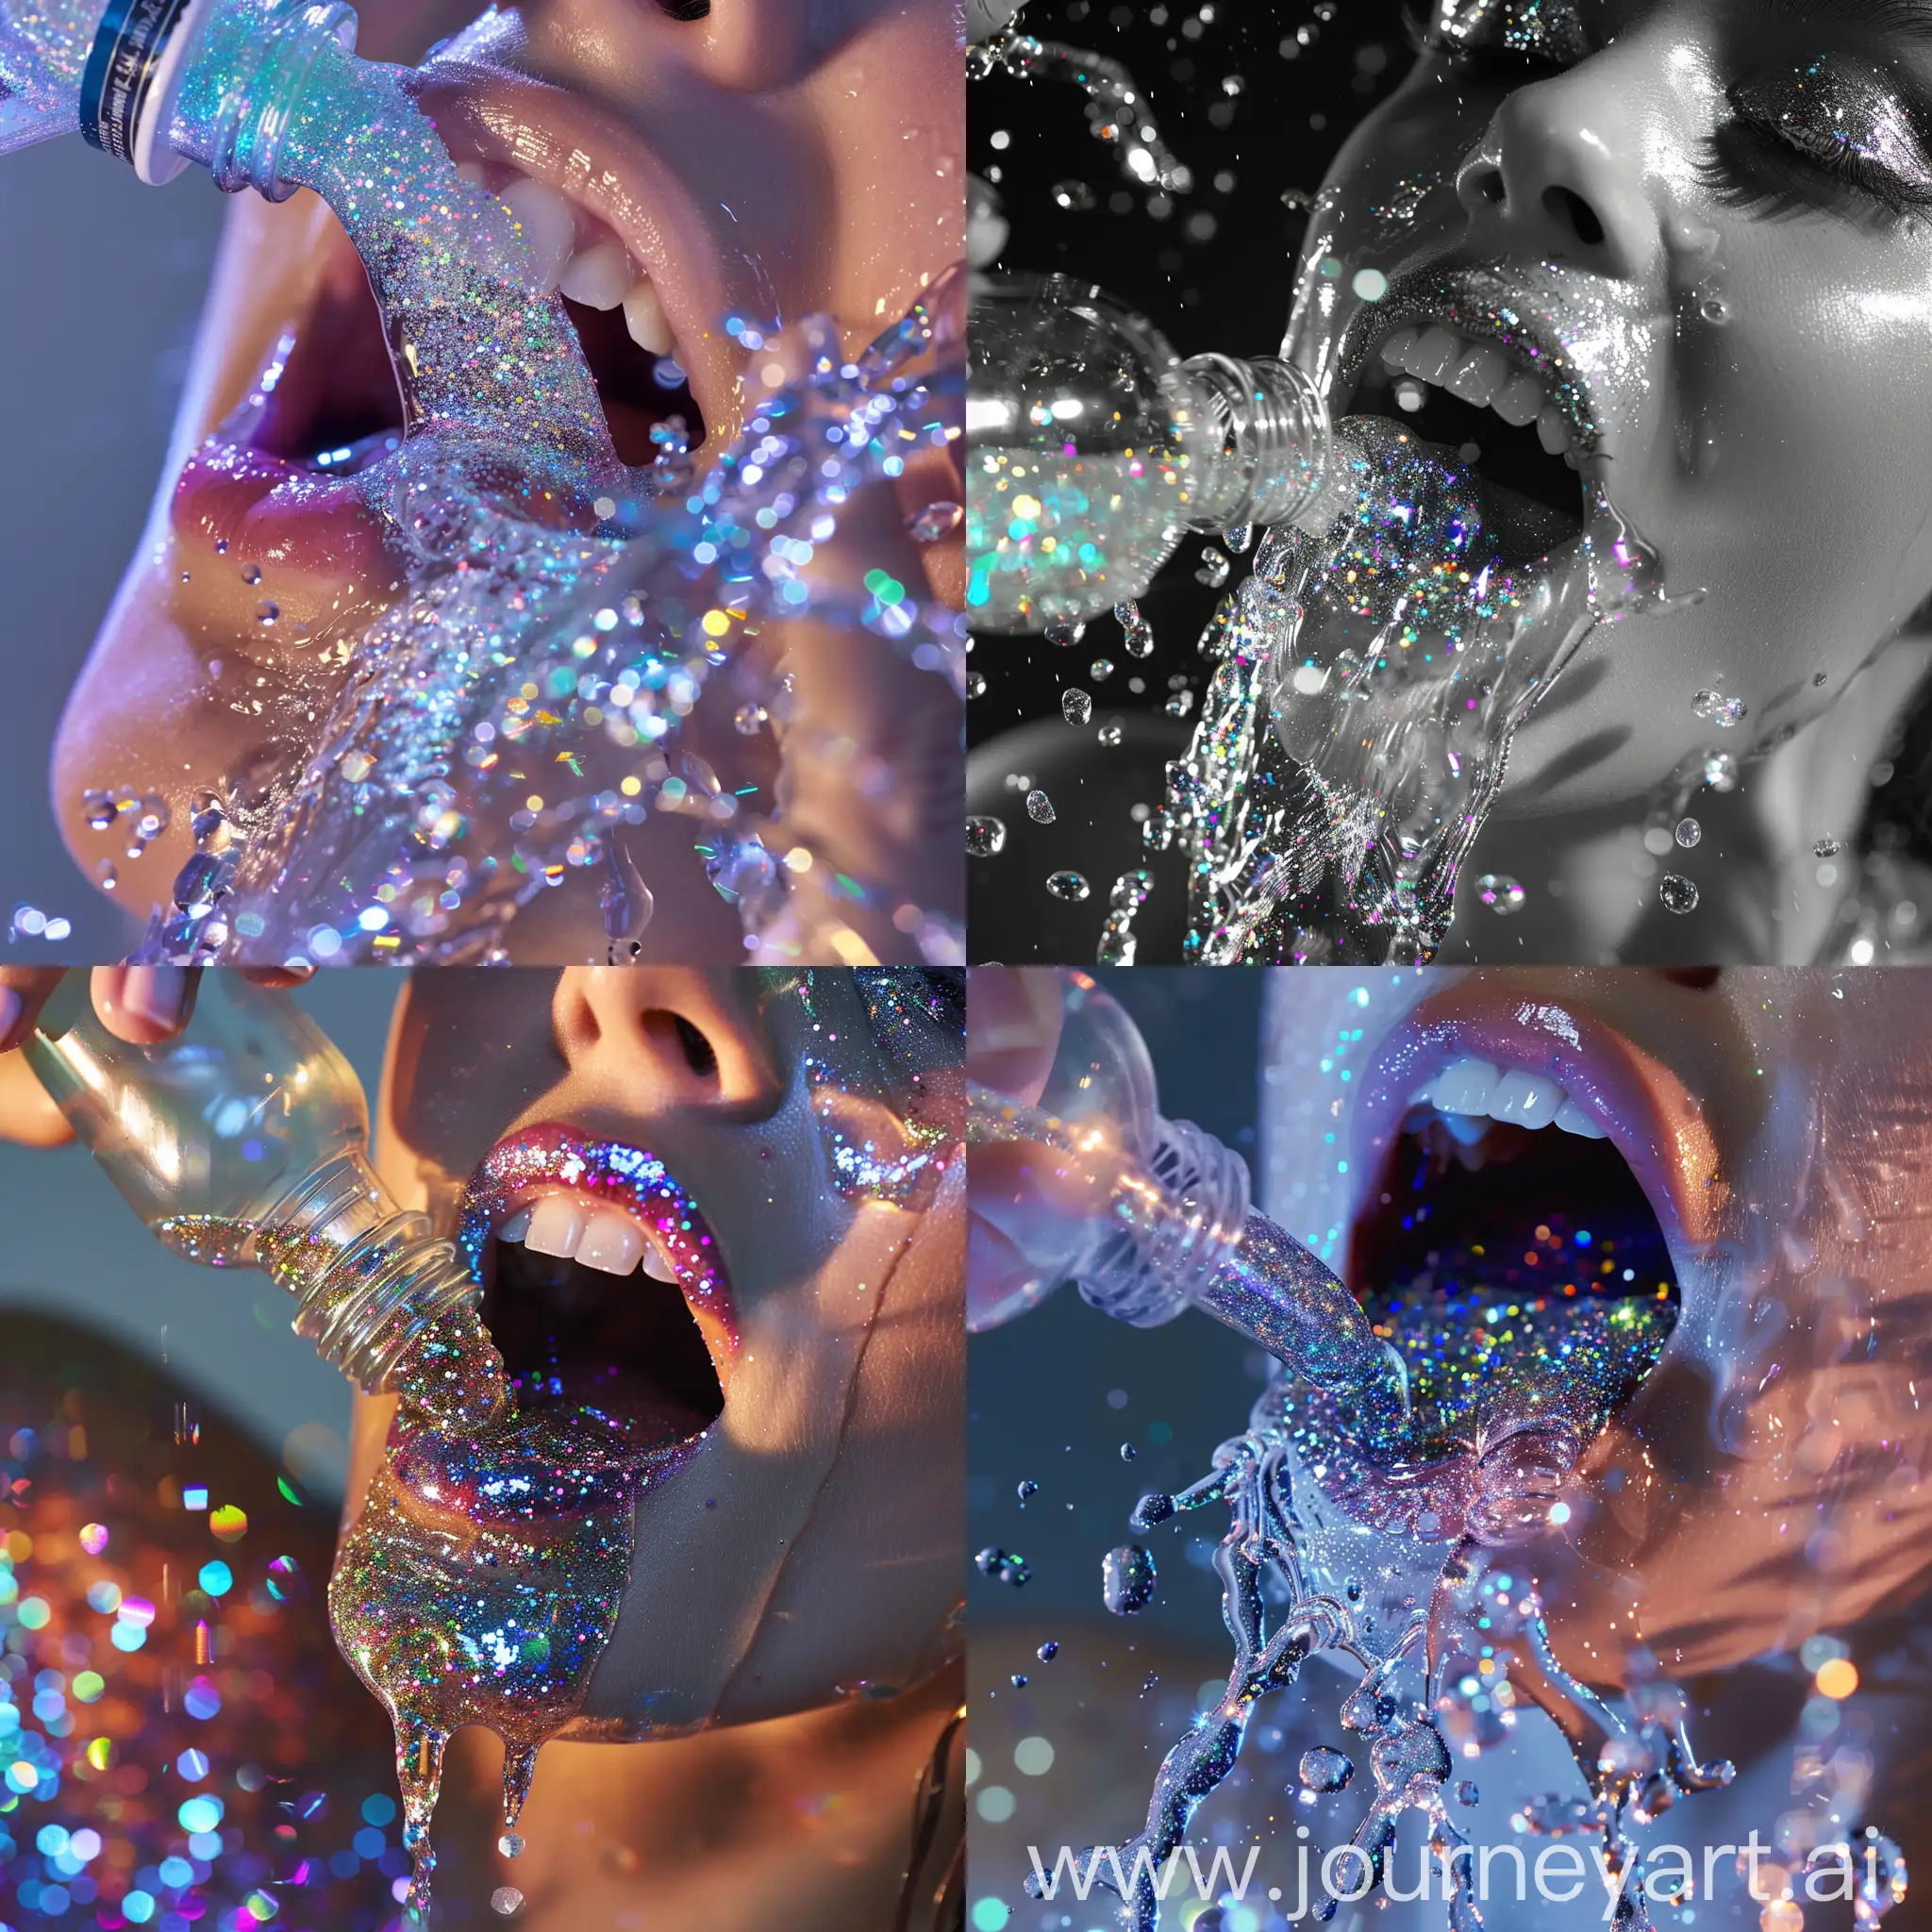 Sparkling-Water-Pouring-into-Womans-Mouth